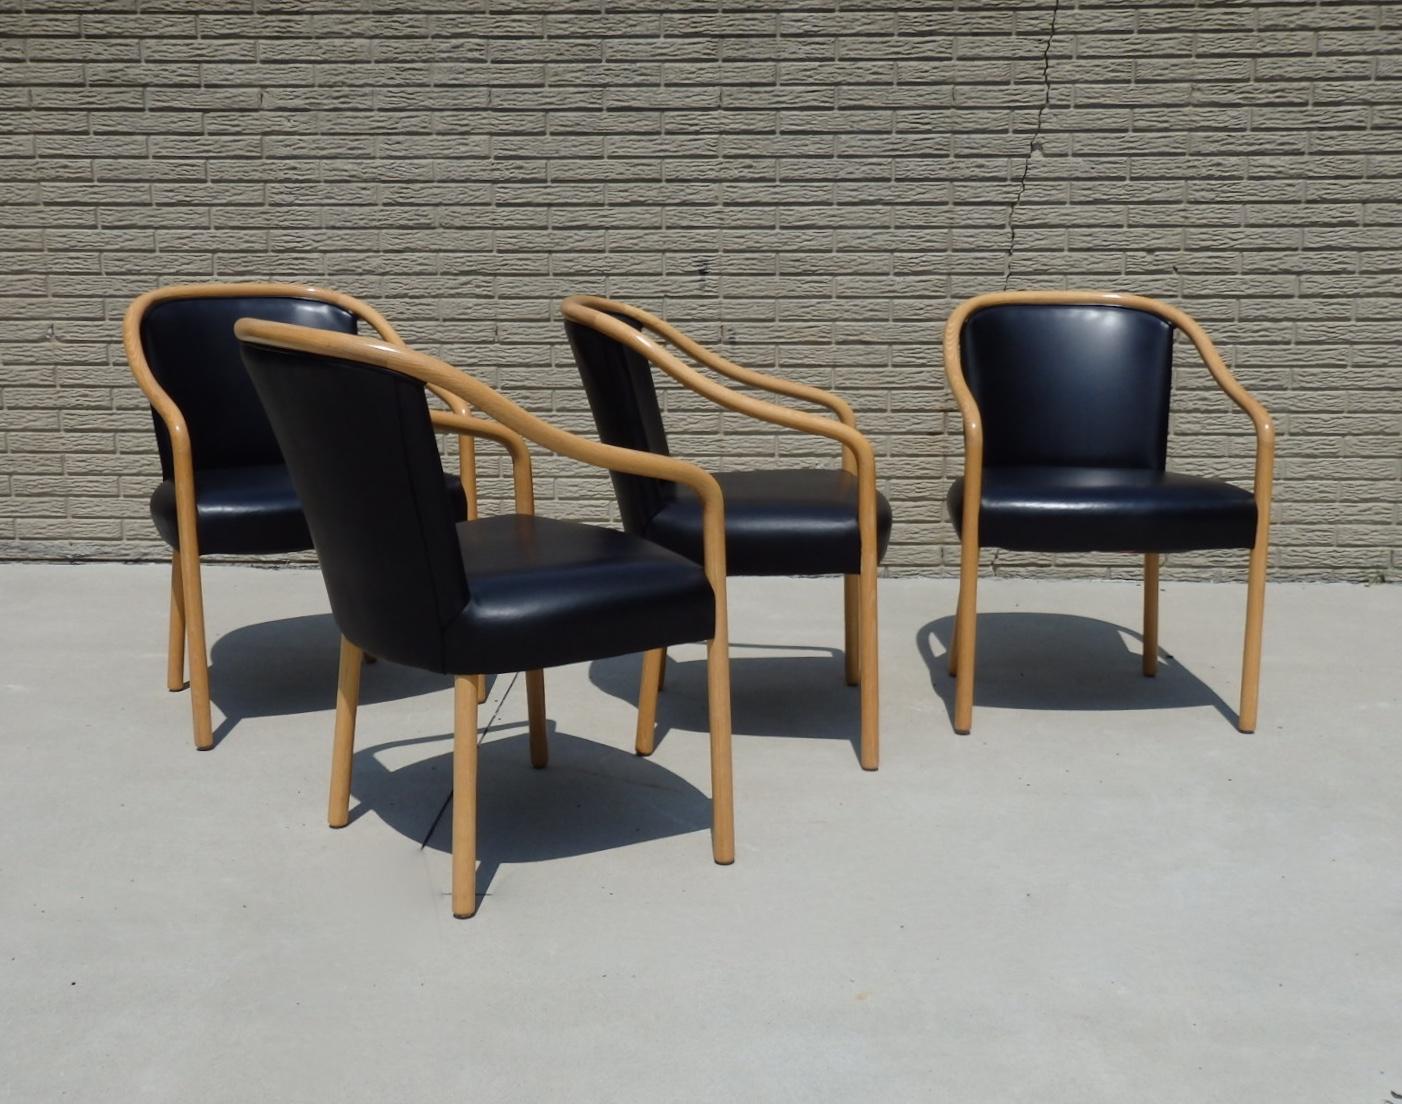 Set of four ash frame chairs upholstered in black leather. Designed by Ward Bennet for Brickel Associates. Condition is superb.